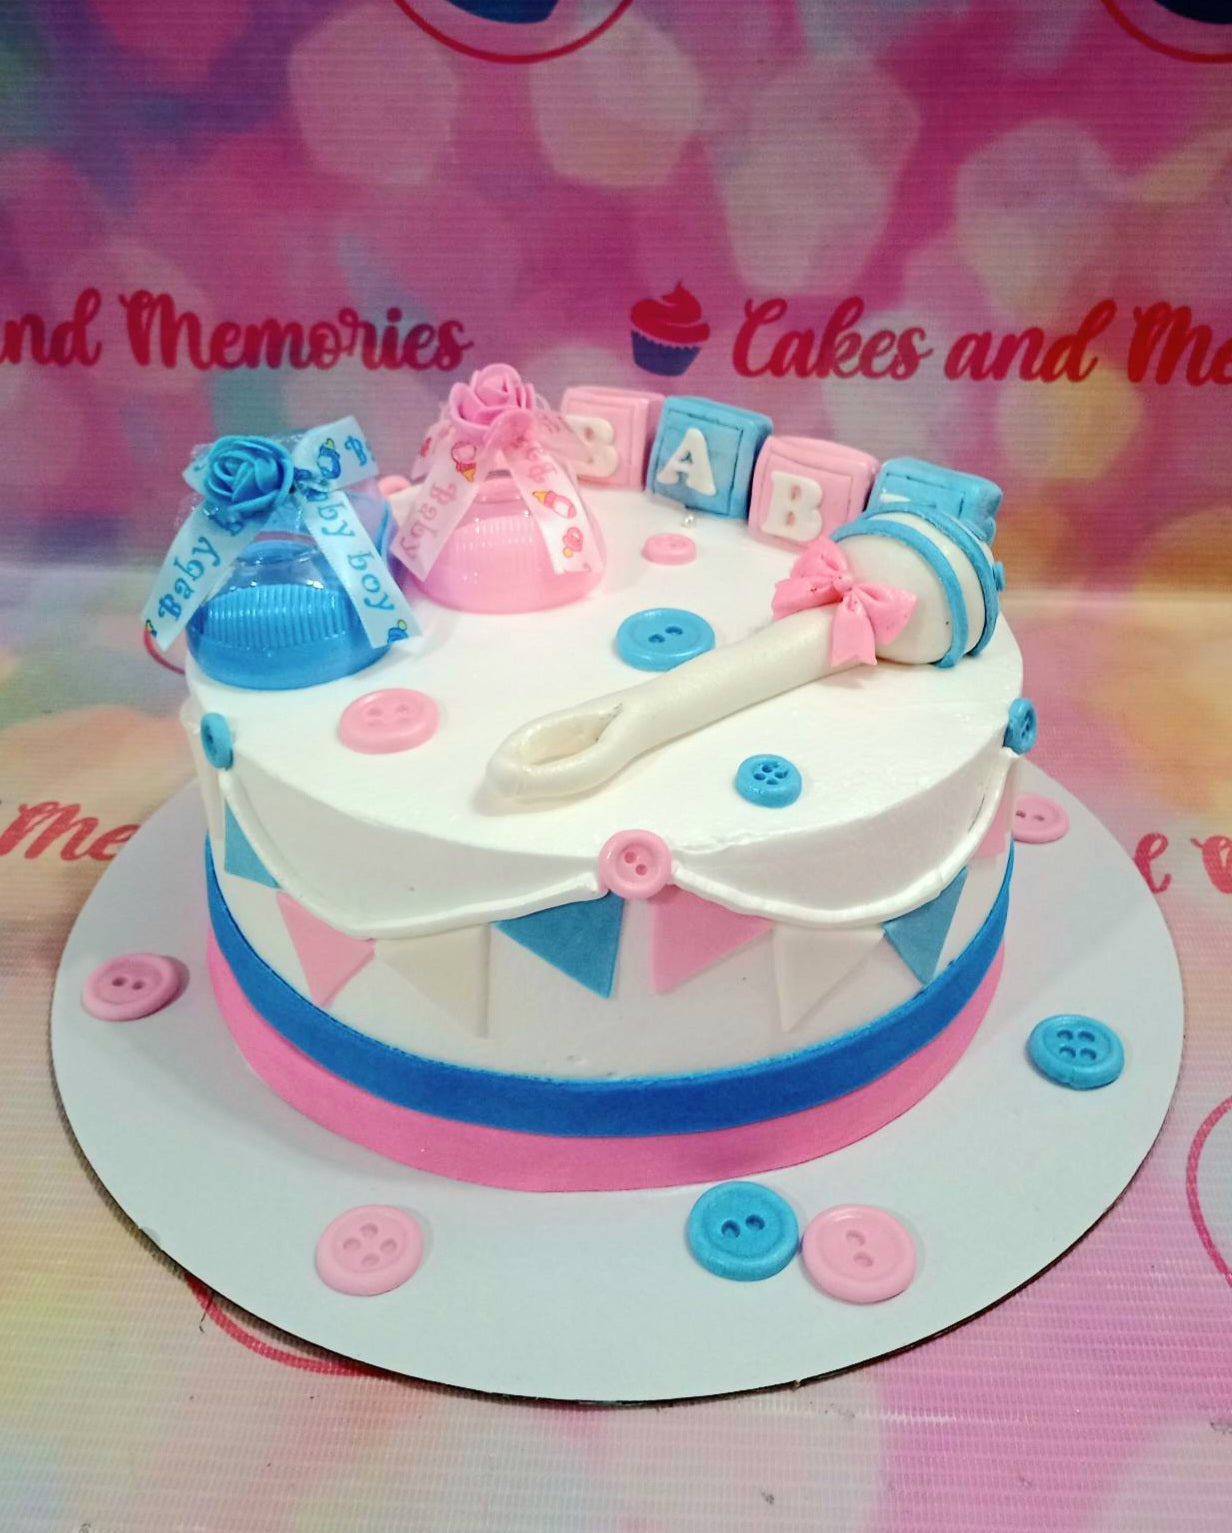 This gender reveal cake is custom-made for a special occasion! Featuring fondant pieces in shades of blue and pink, along with charming baby shoes and other decorative details, this cake will make a great centerpiece for your baby shower or gender reveal party. The intricate details and beautiful presentation of this cake is sure to make a lasting impression.